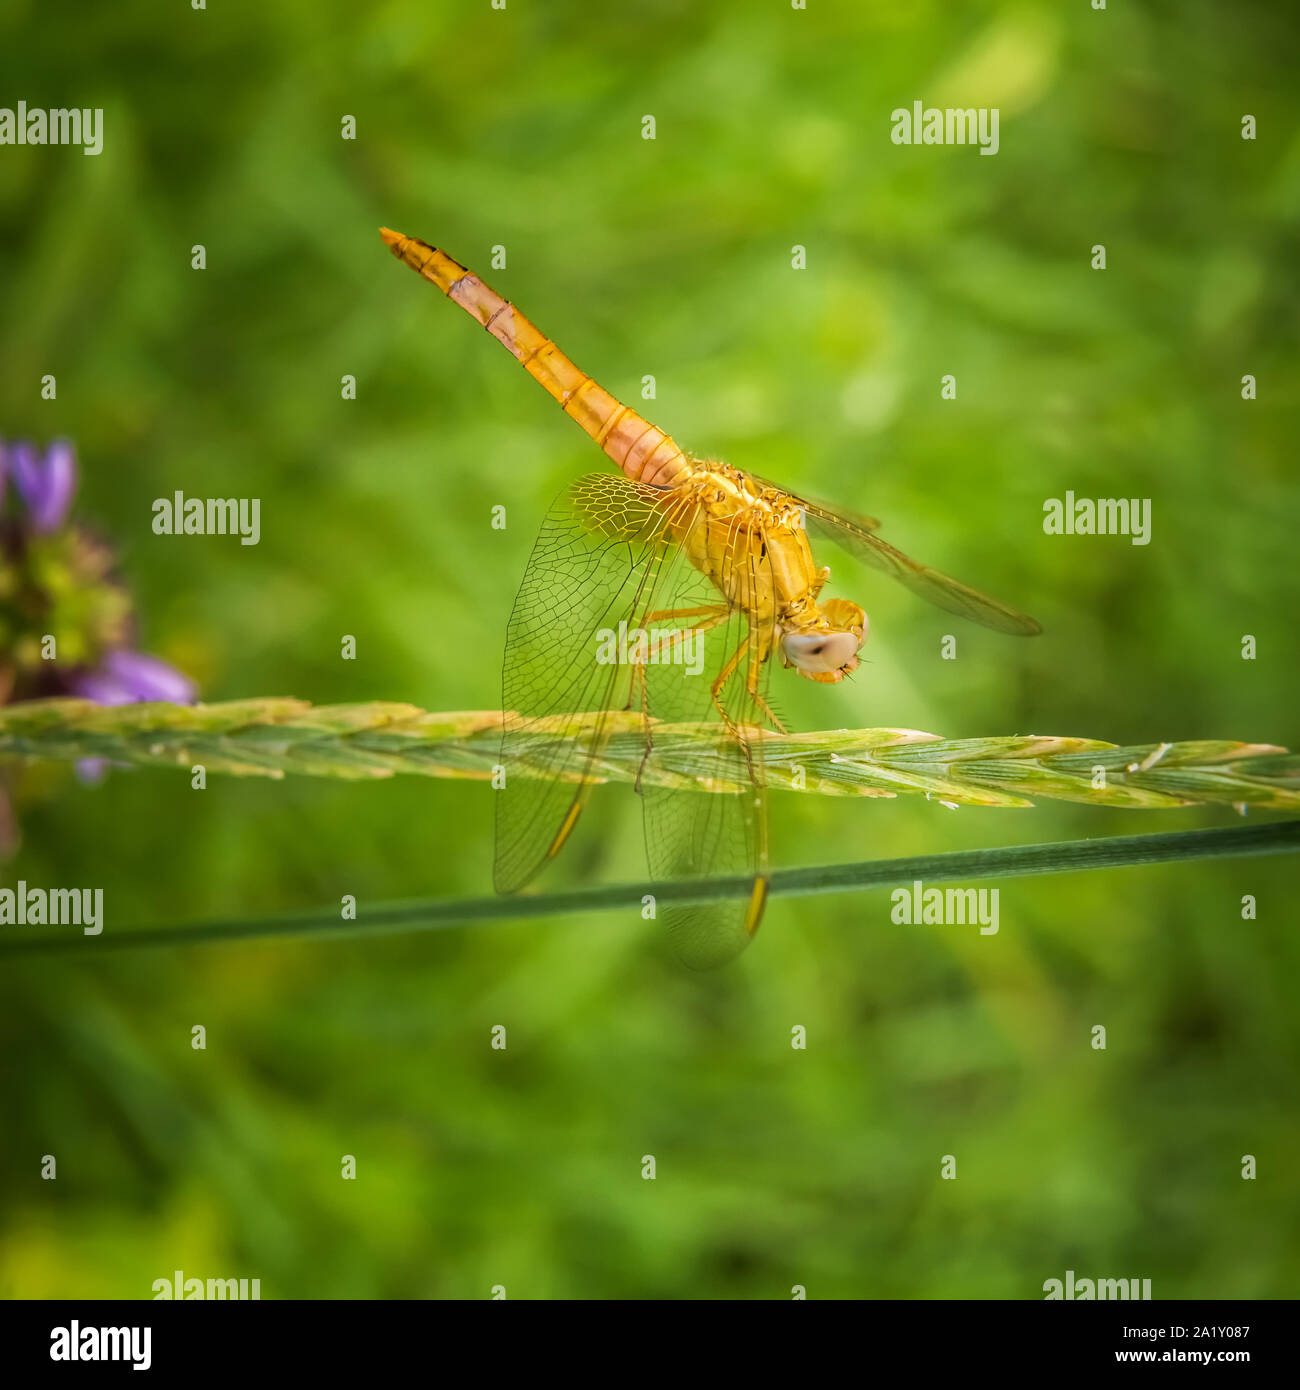 Bright golden yellow dragonfly resting on ear of grass. Sympetrum flaveolum specie. Unfocused blooming meadow at background.  Selective focus. Square Stock Photo